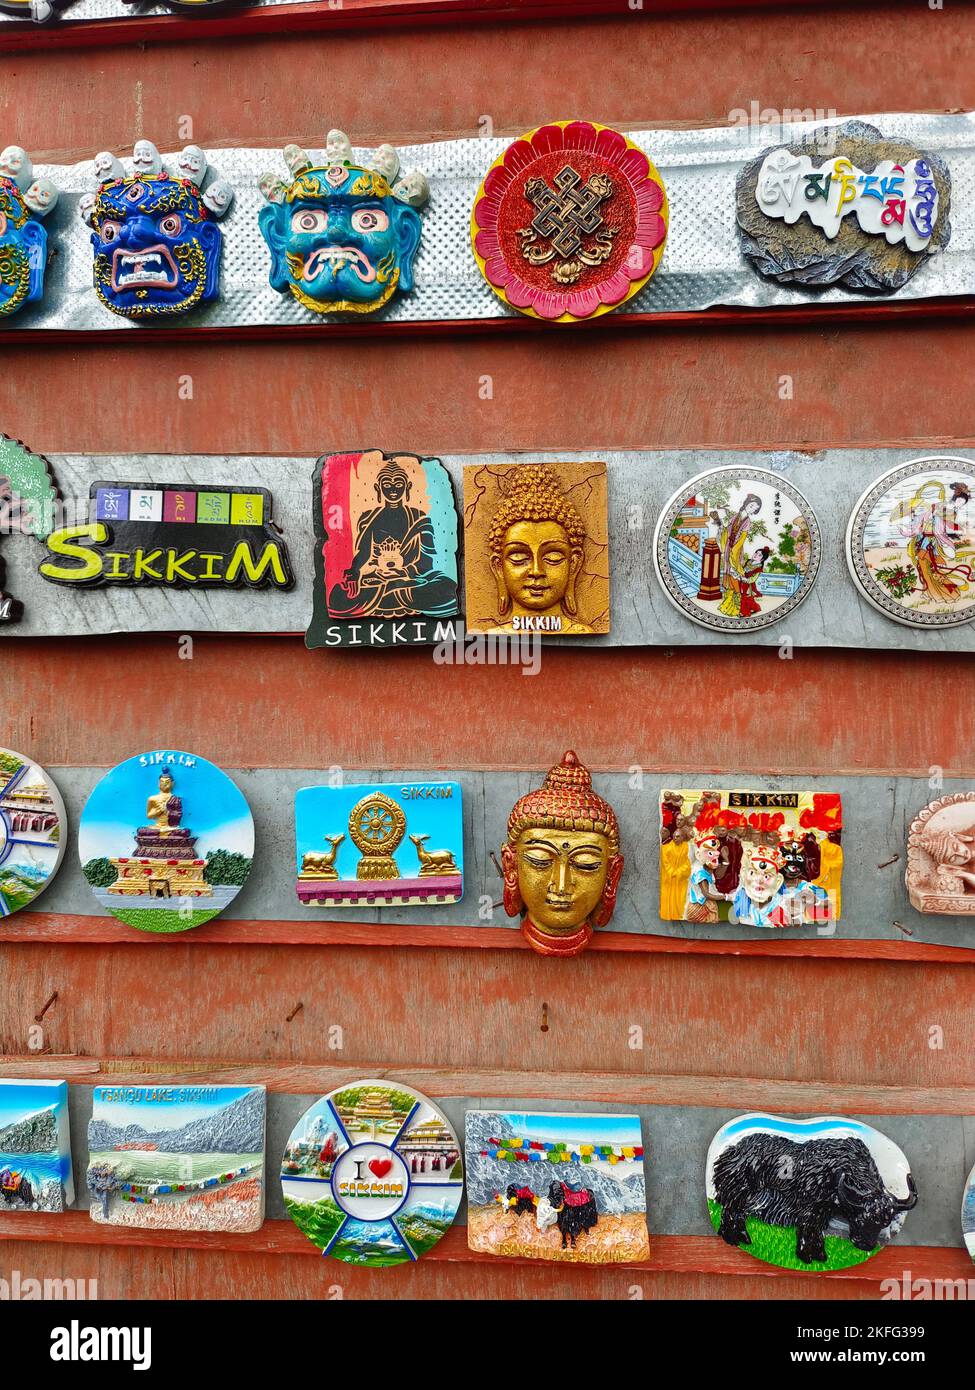 artisanal crafts and fridge magnets for sale at street Indian market in Sikkim, India Stock Photo